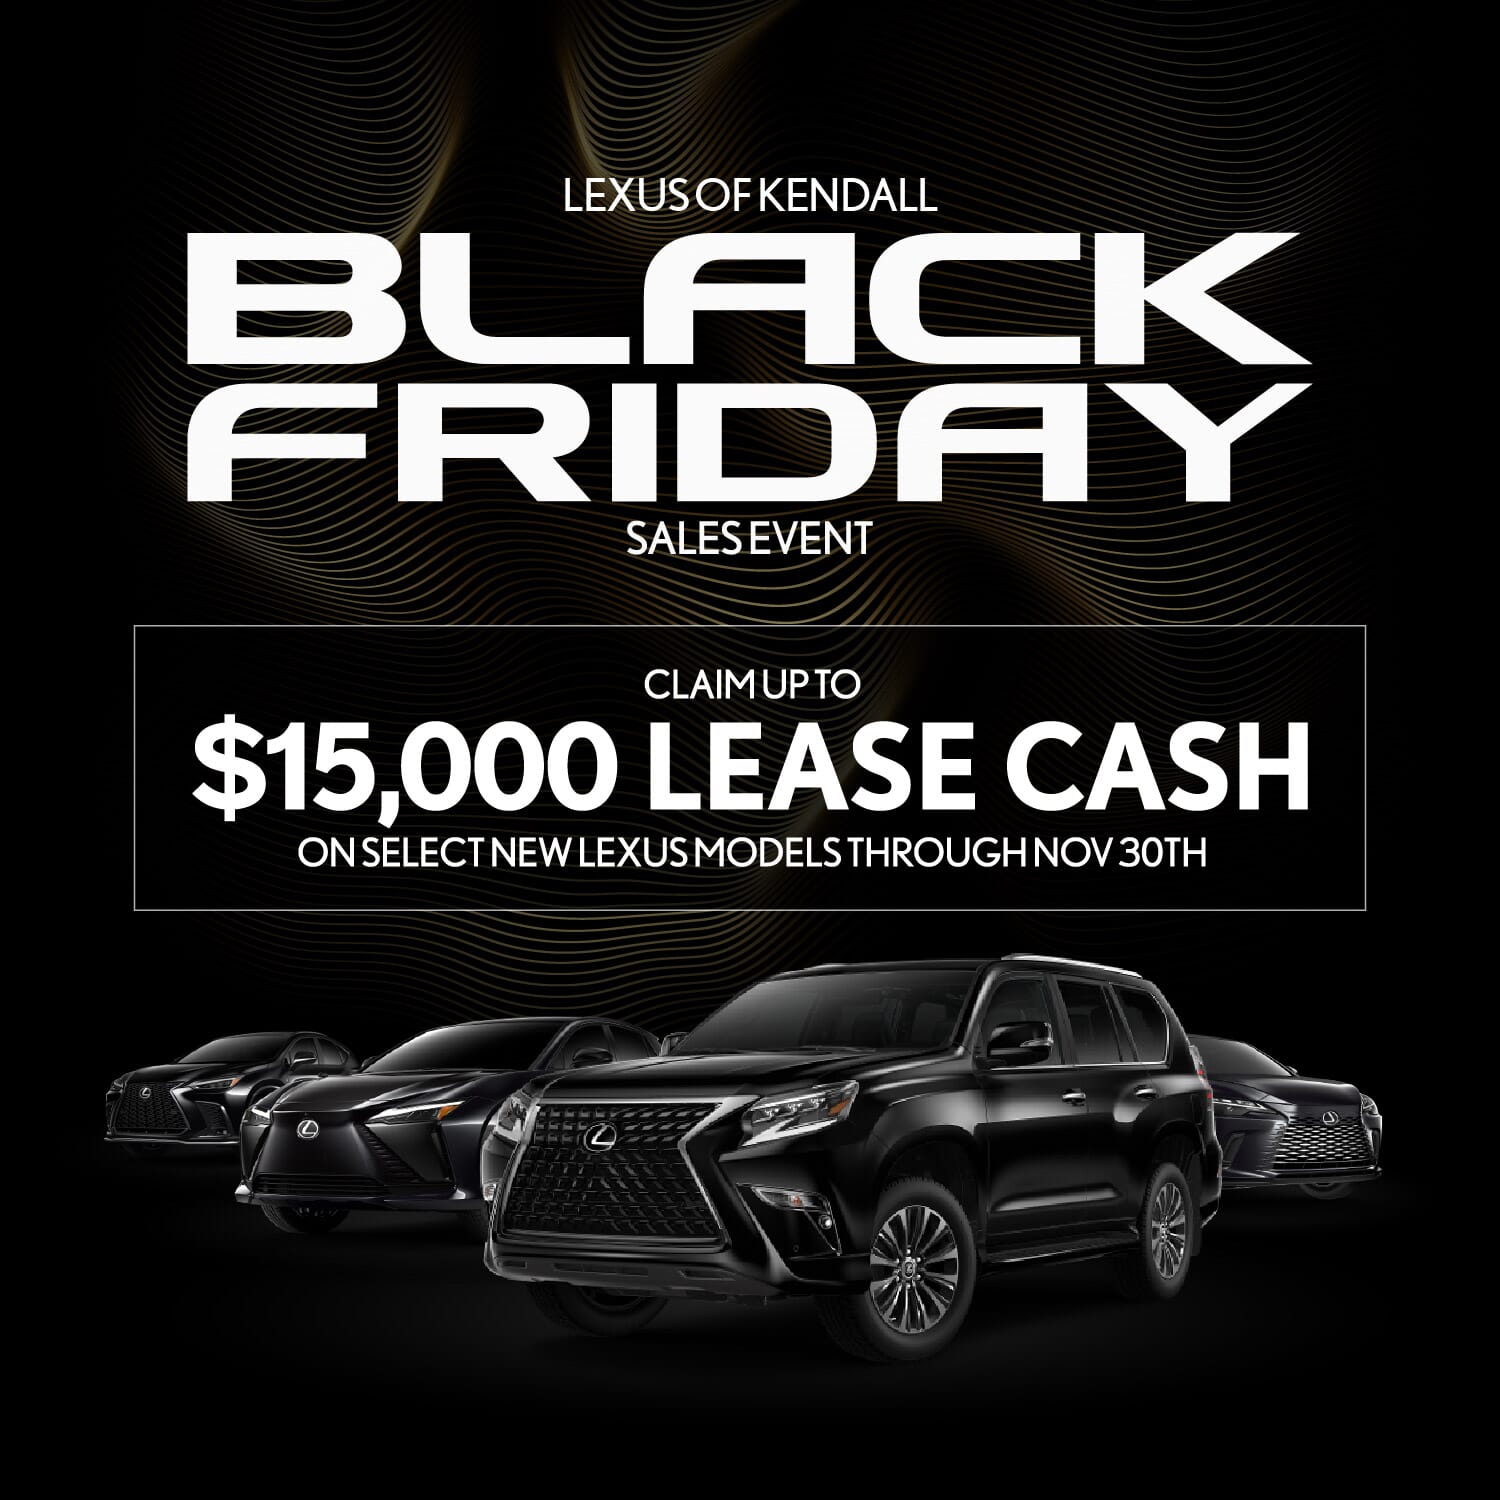 Lexus savings off MSRP and lease cash available